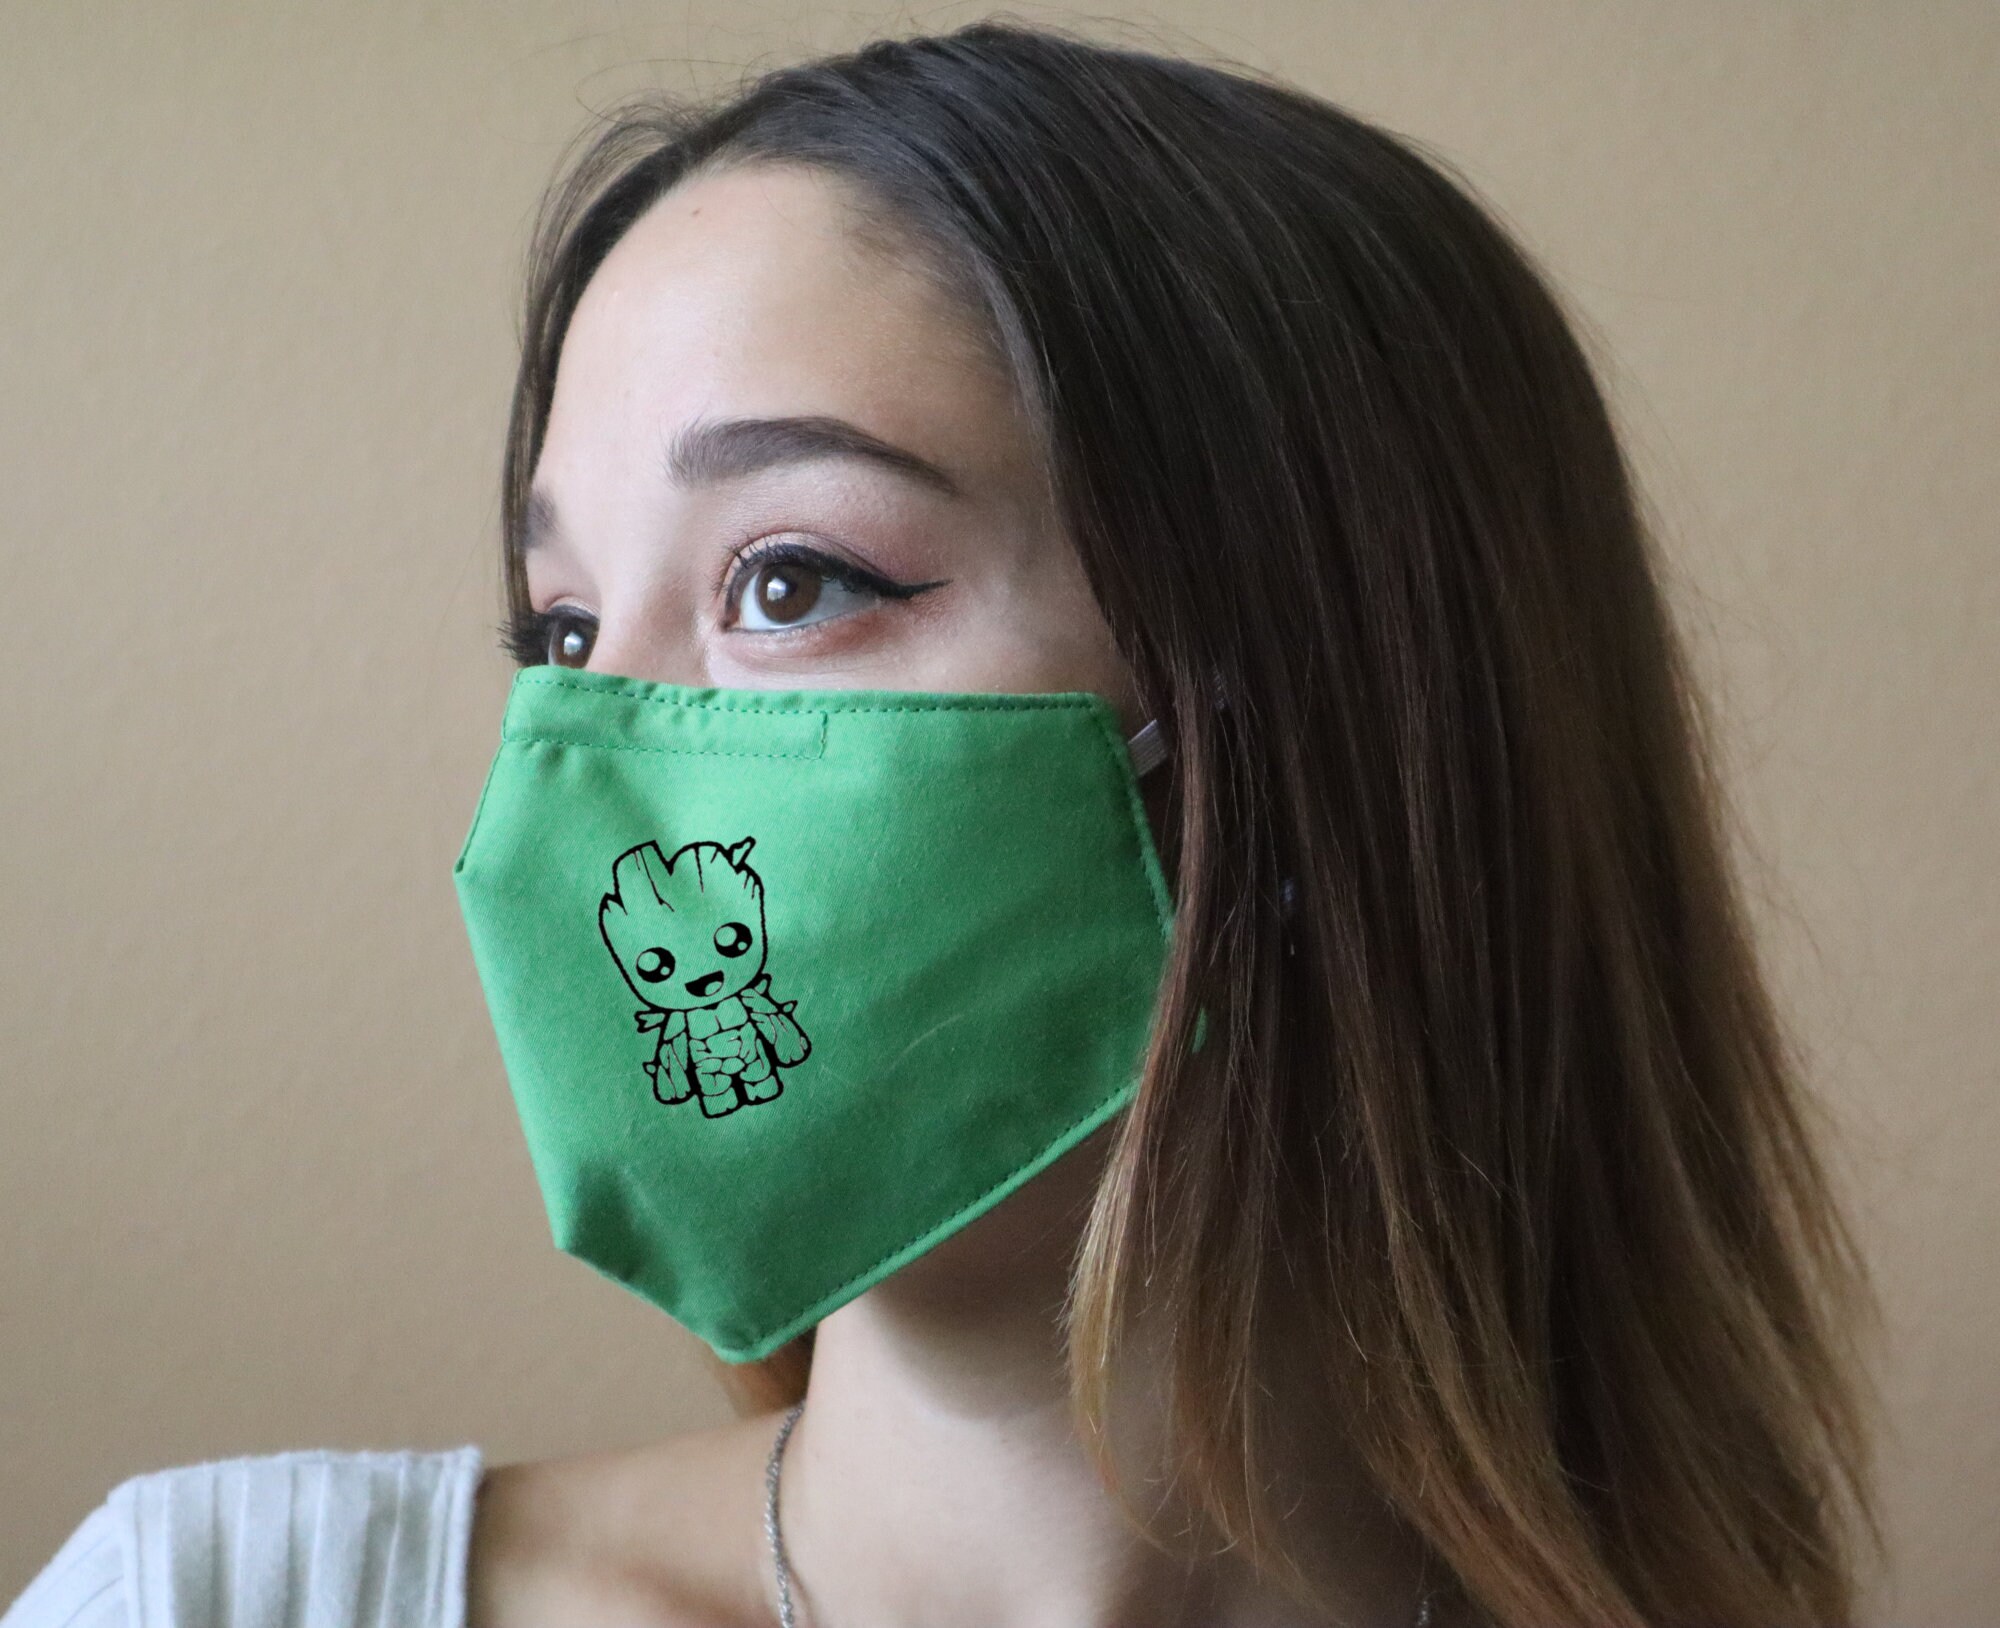 Handmade Cotton Blend Customizable Face Masks With Adjustable Ear-Loops - Super Heroes- Groot Adult Large 10 X 6.5"